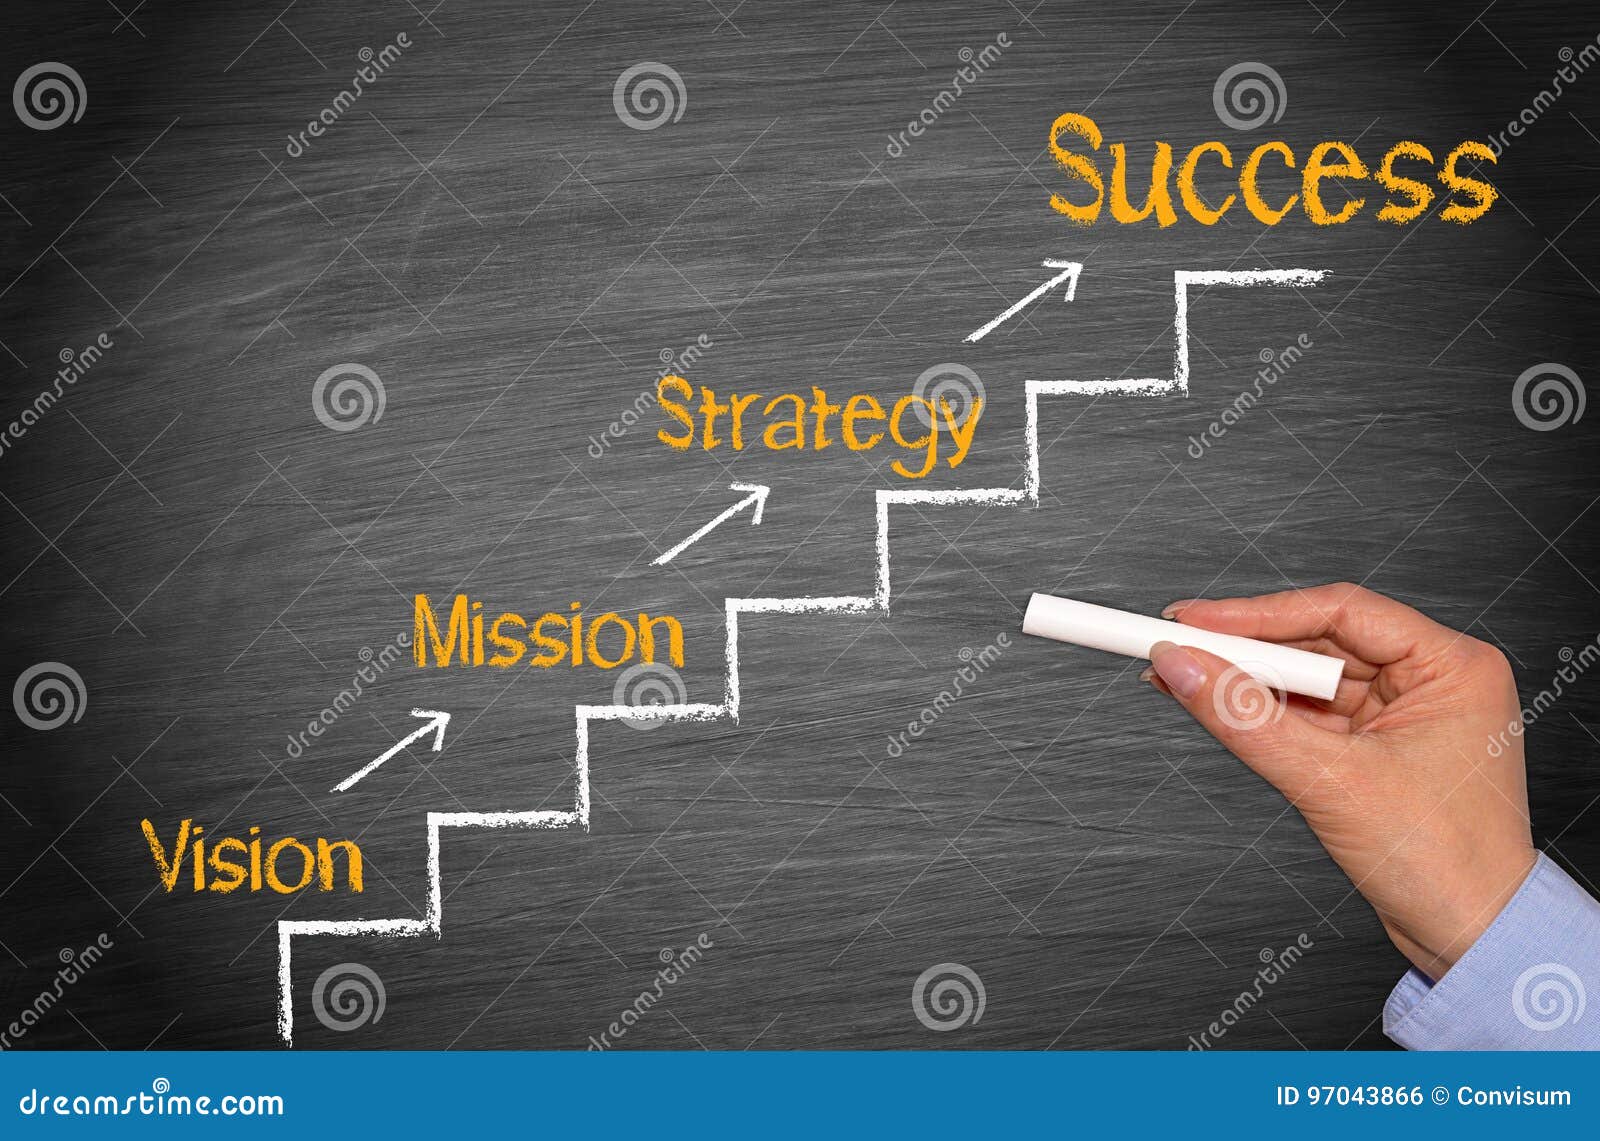 vision, mission, strategy, success - business performance ladder